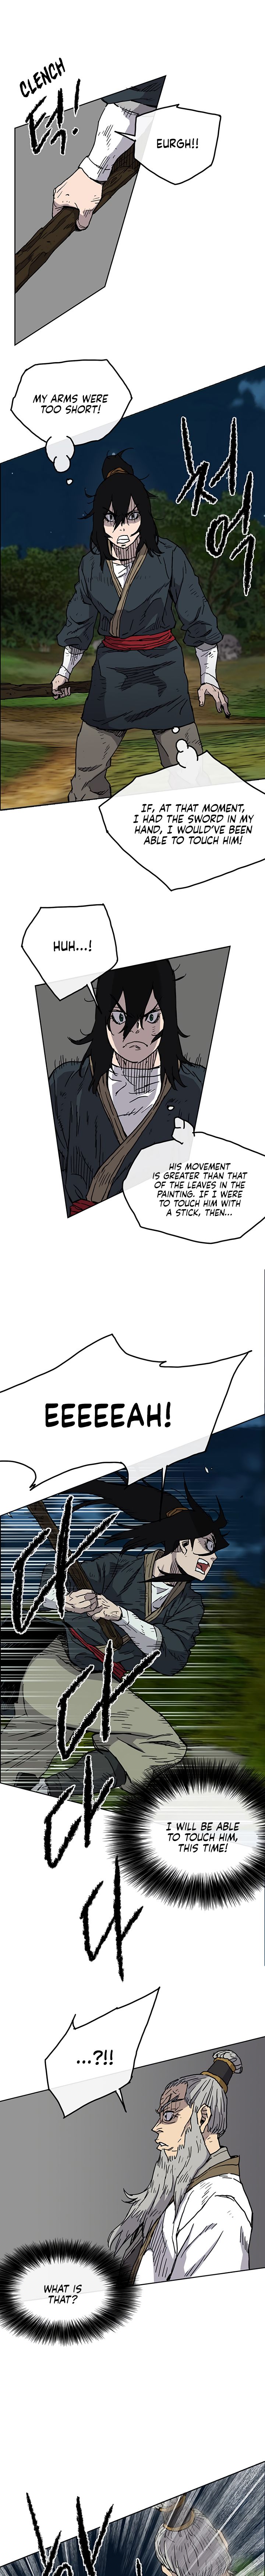 The Undefeatable Swordsman - Chapter 5 Page 11